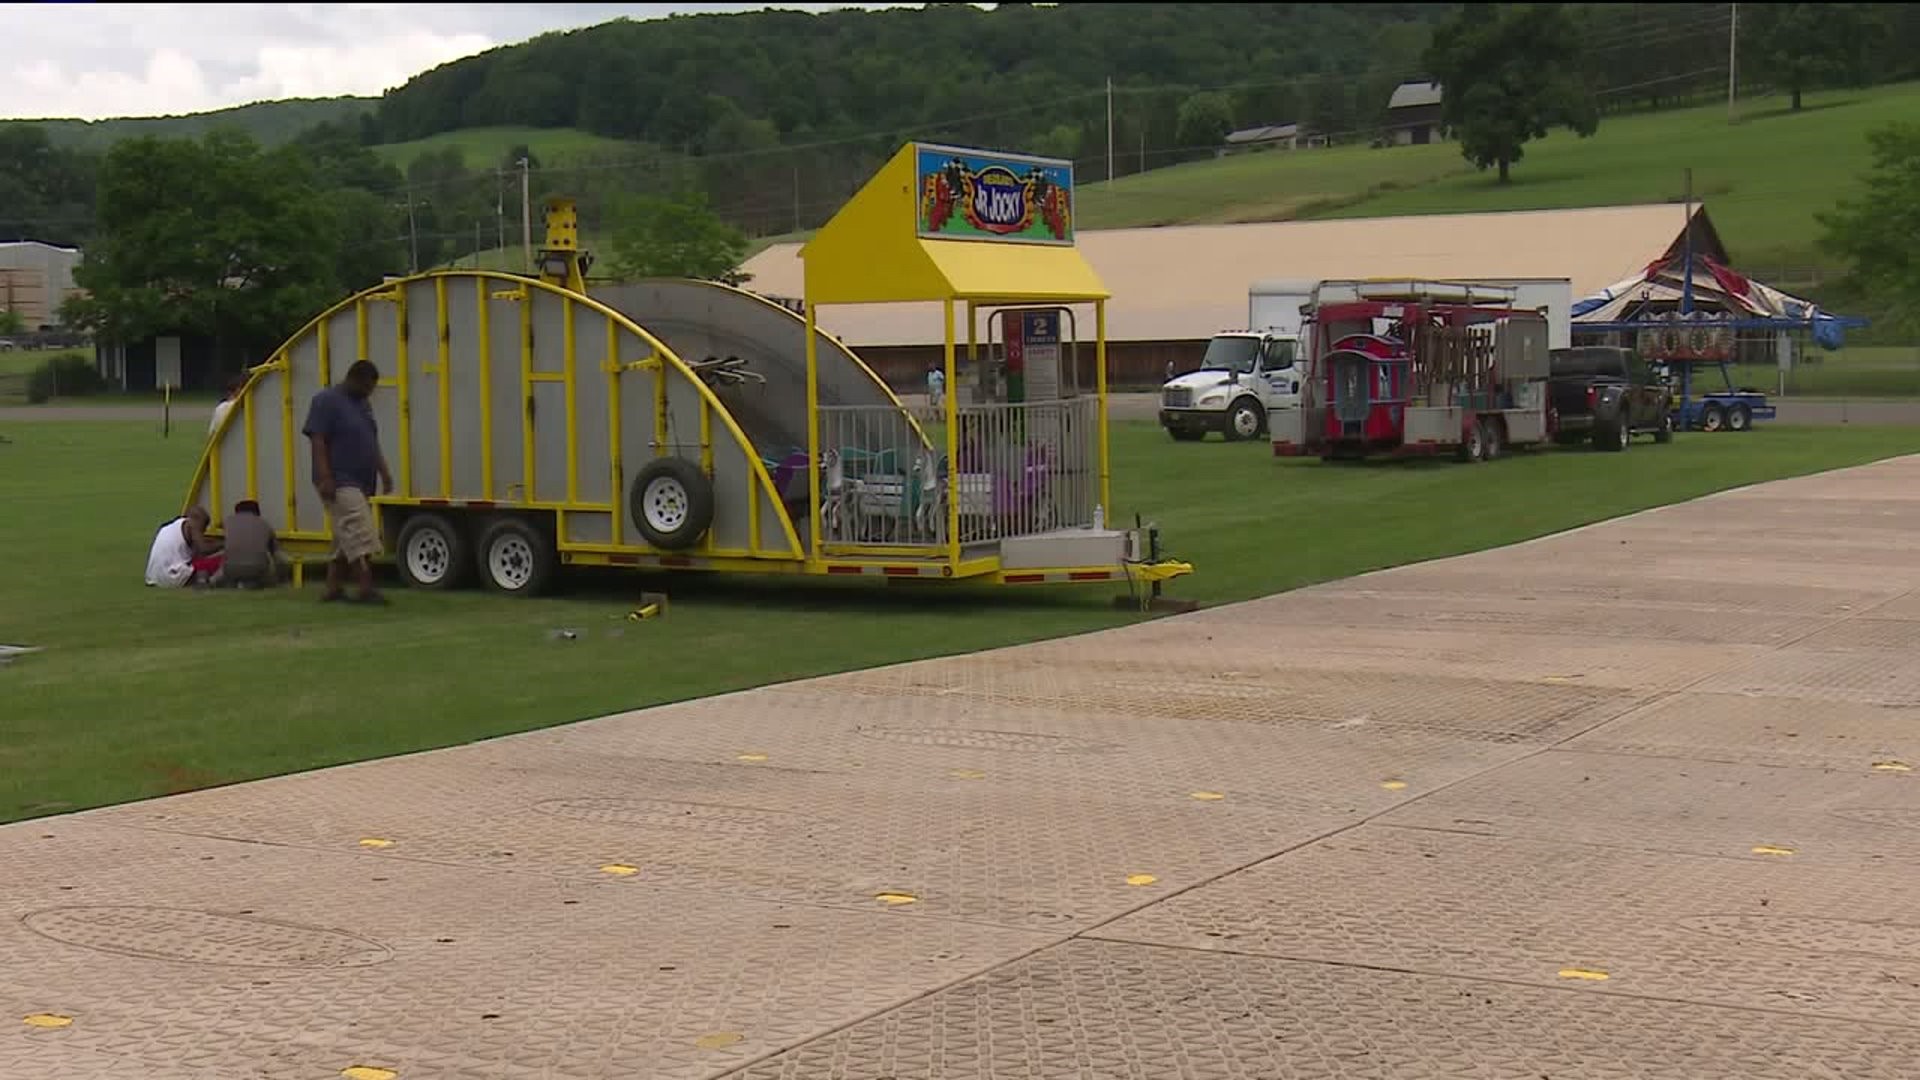 Troy Fair Making Comeback after Last Year’s Floods